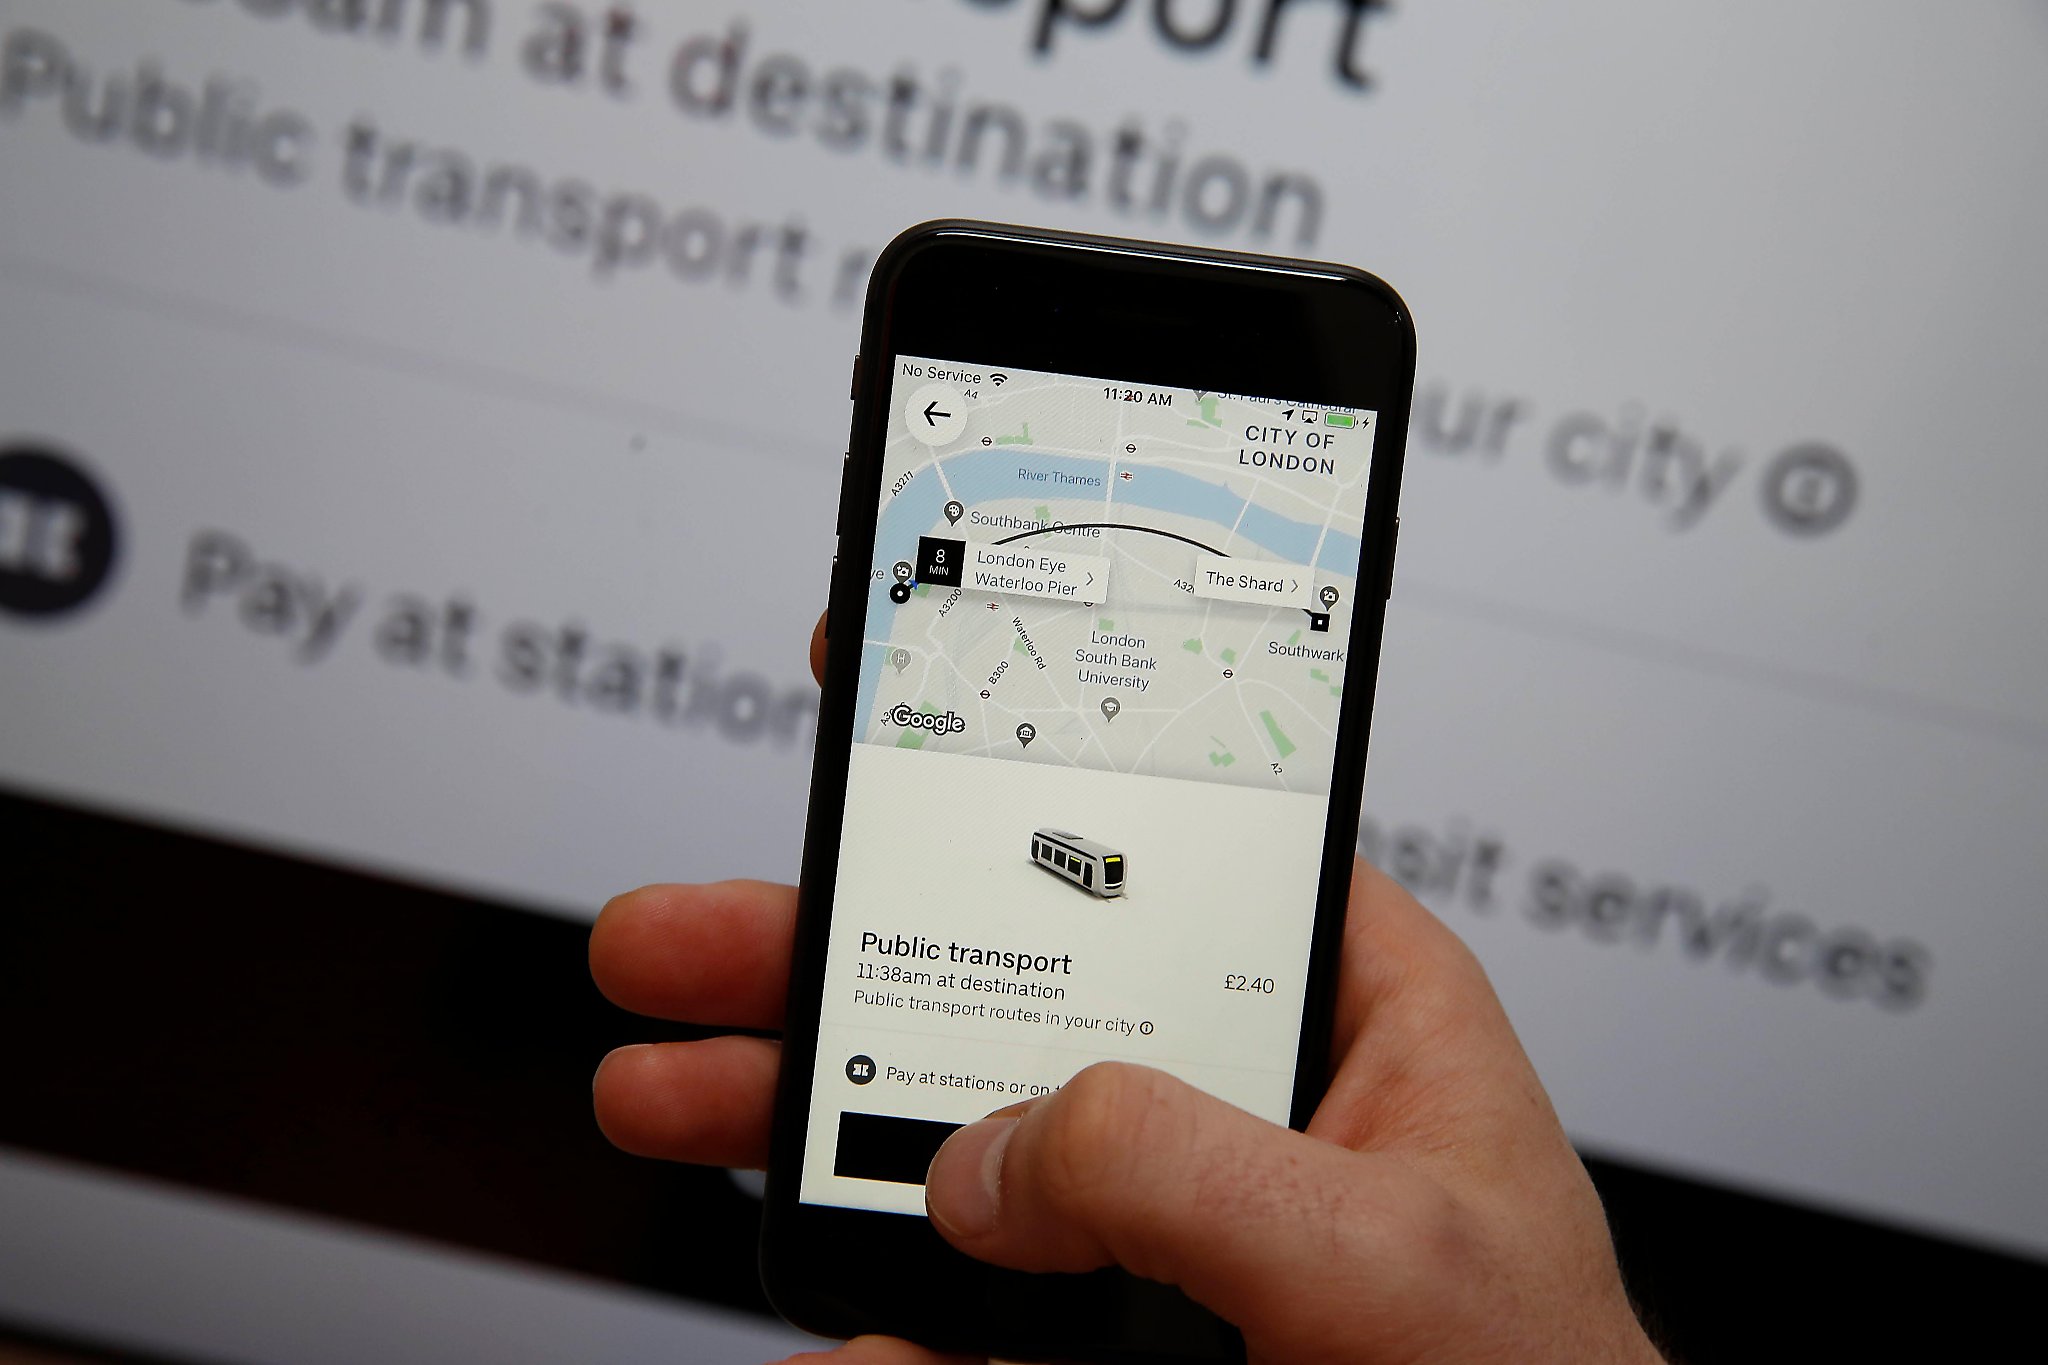 Now in the Uber app you can plan your trip by public transport